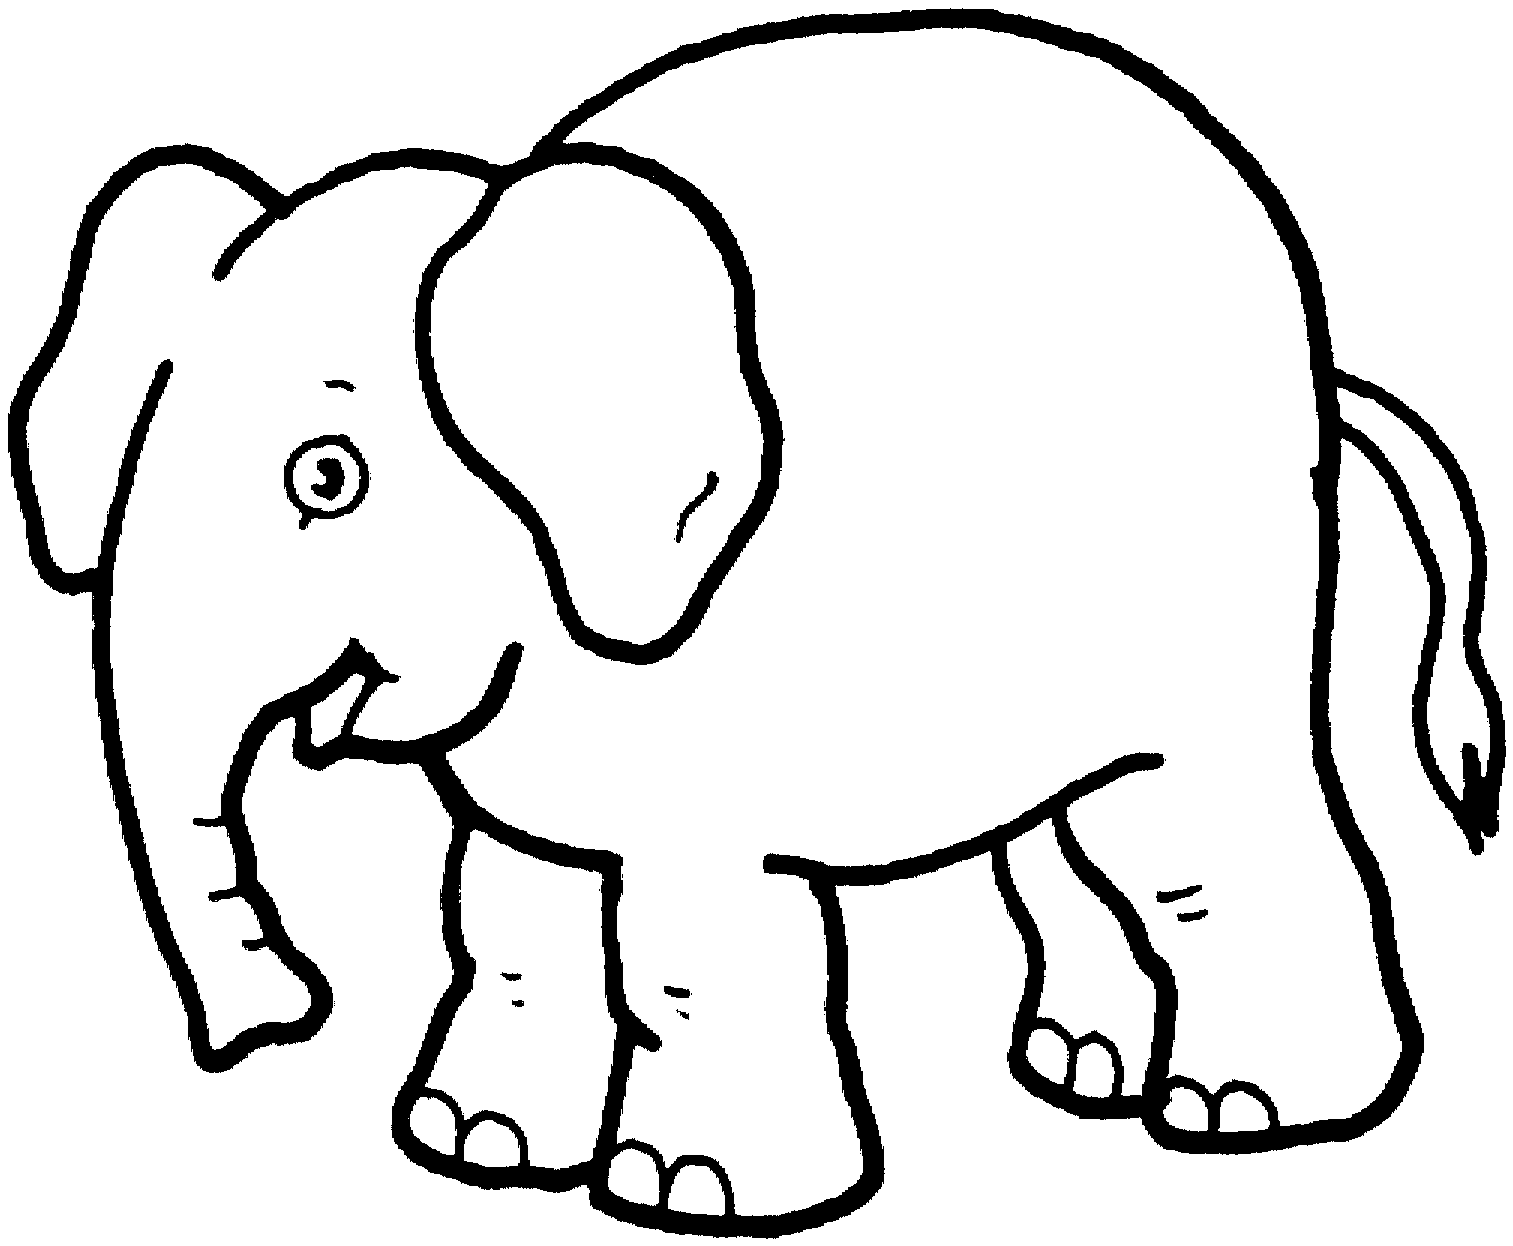 Images For > Elephant Outline Drawing